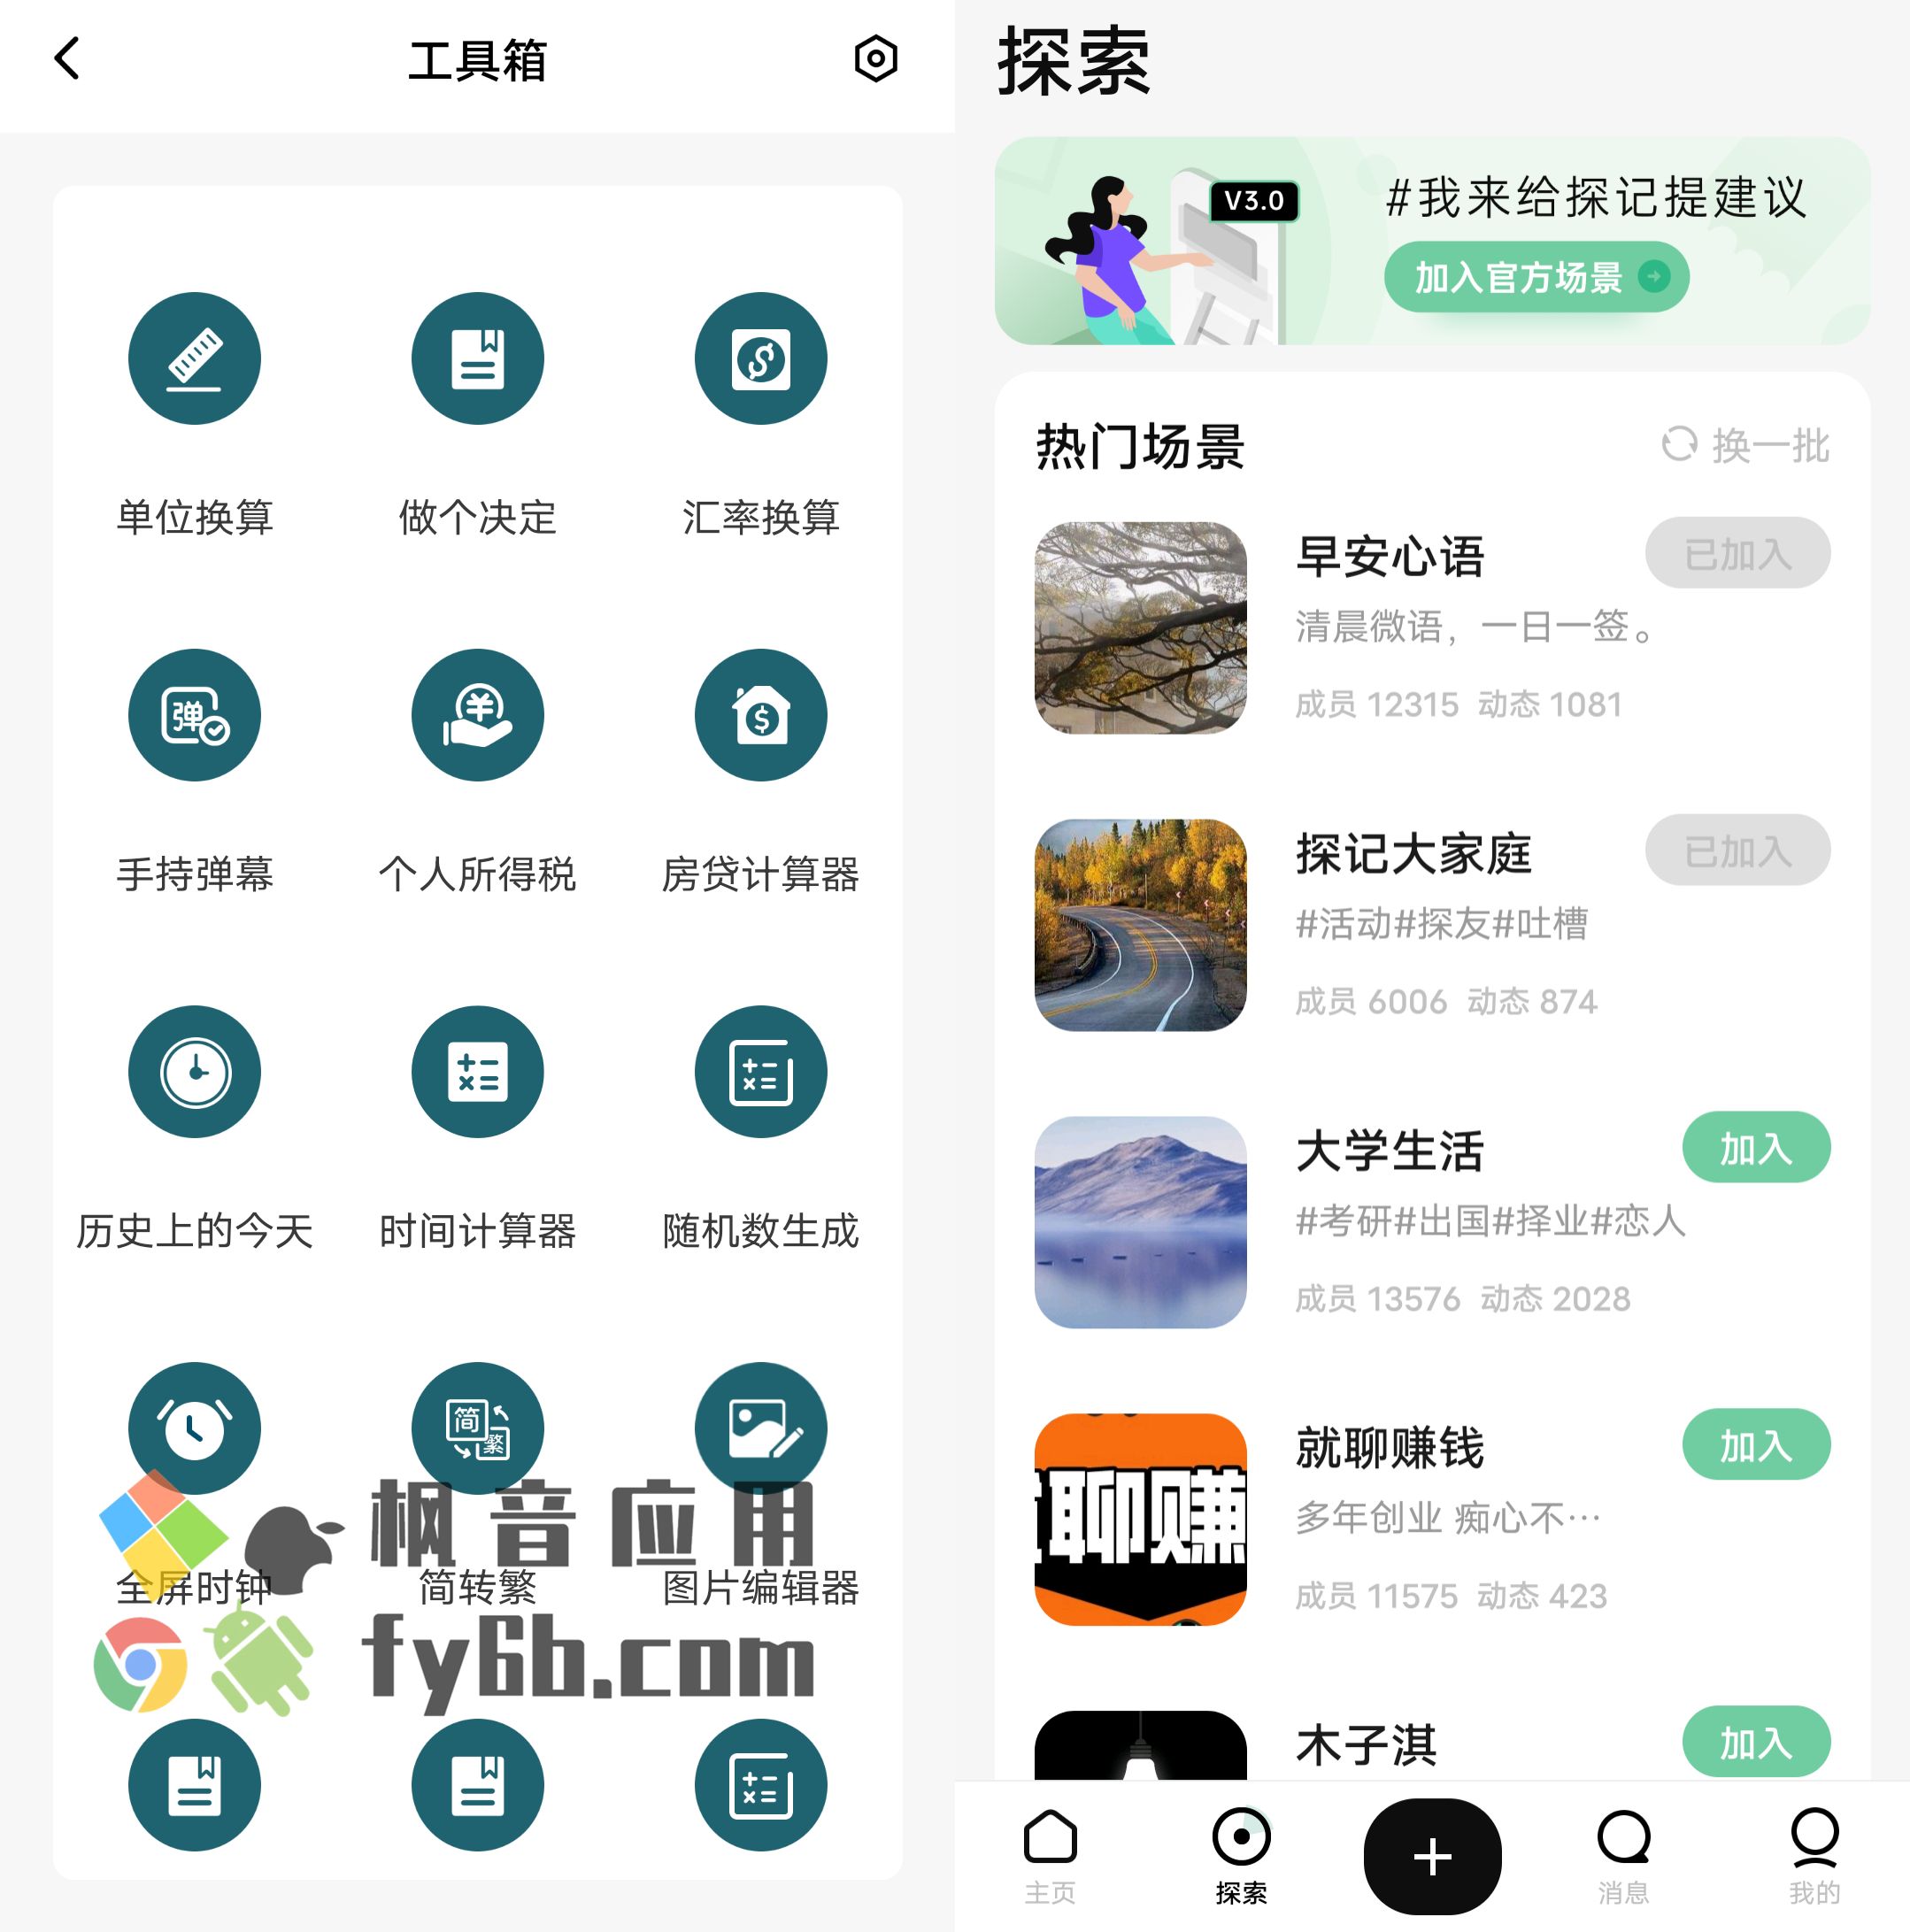 Android+iOS 探记_3.2.5